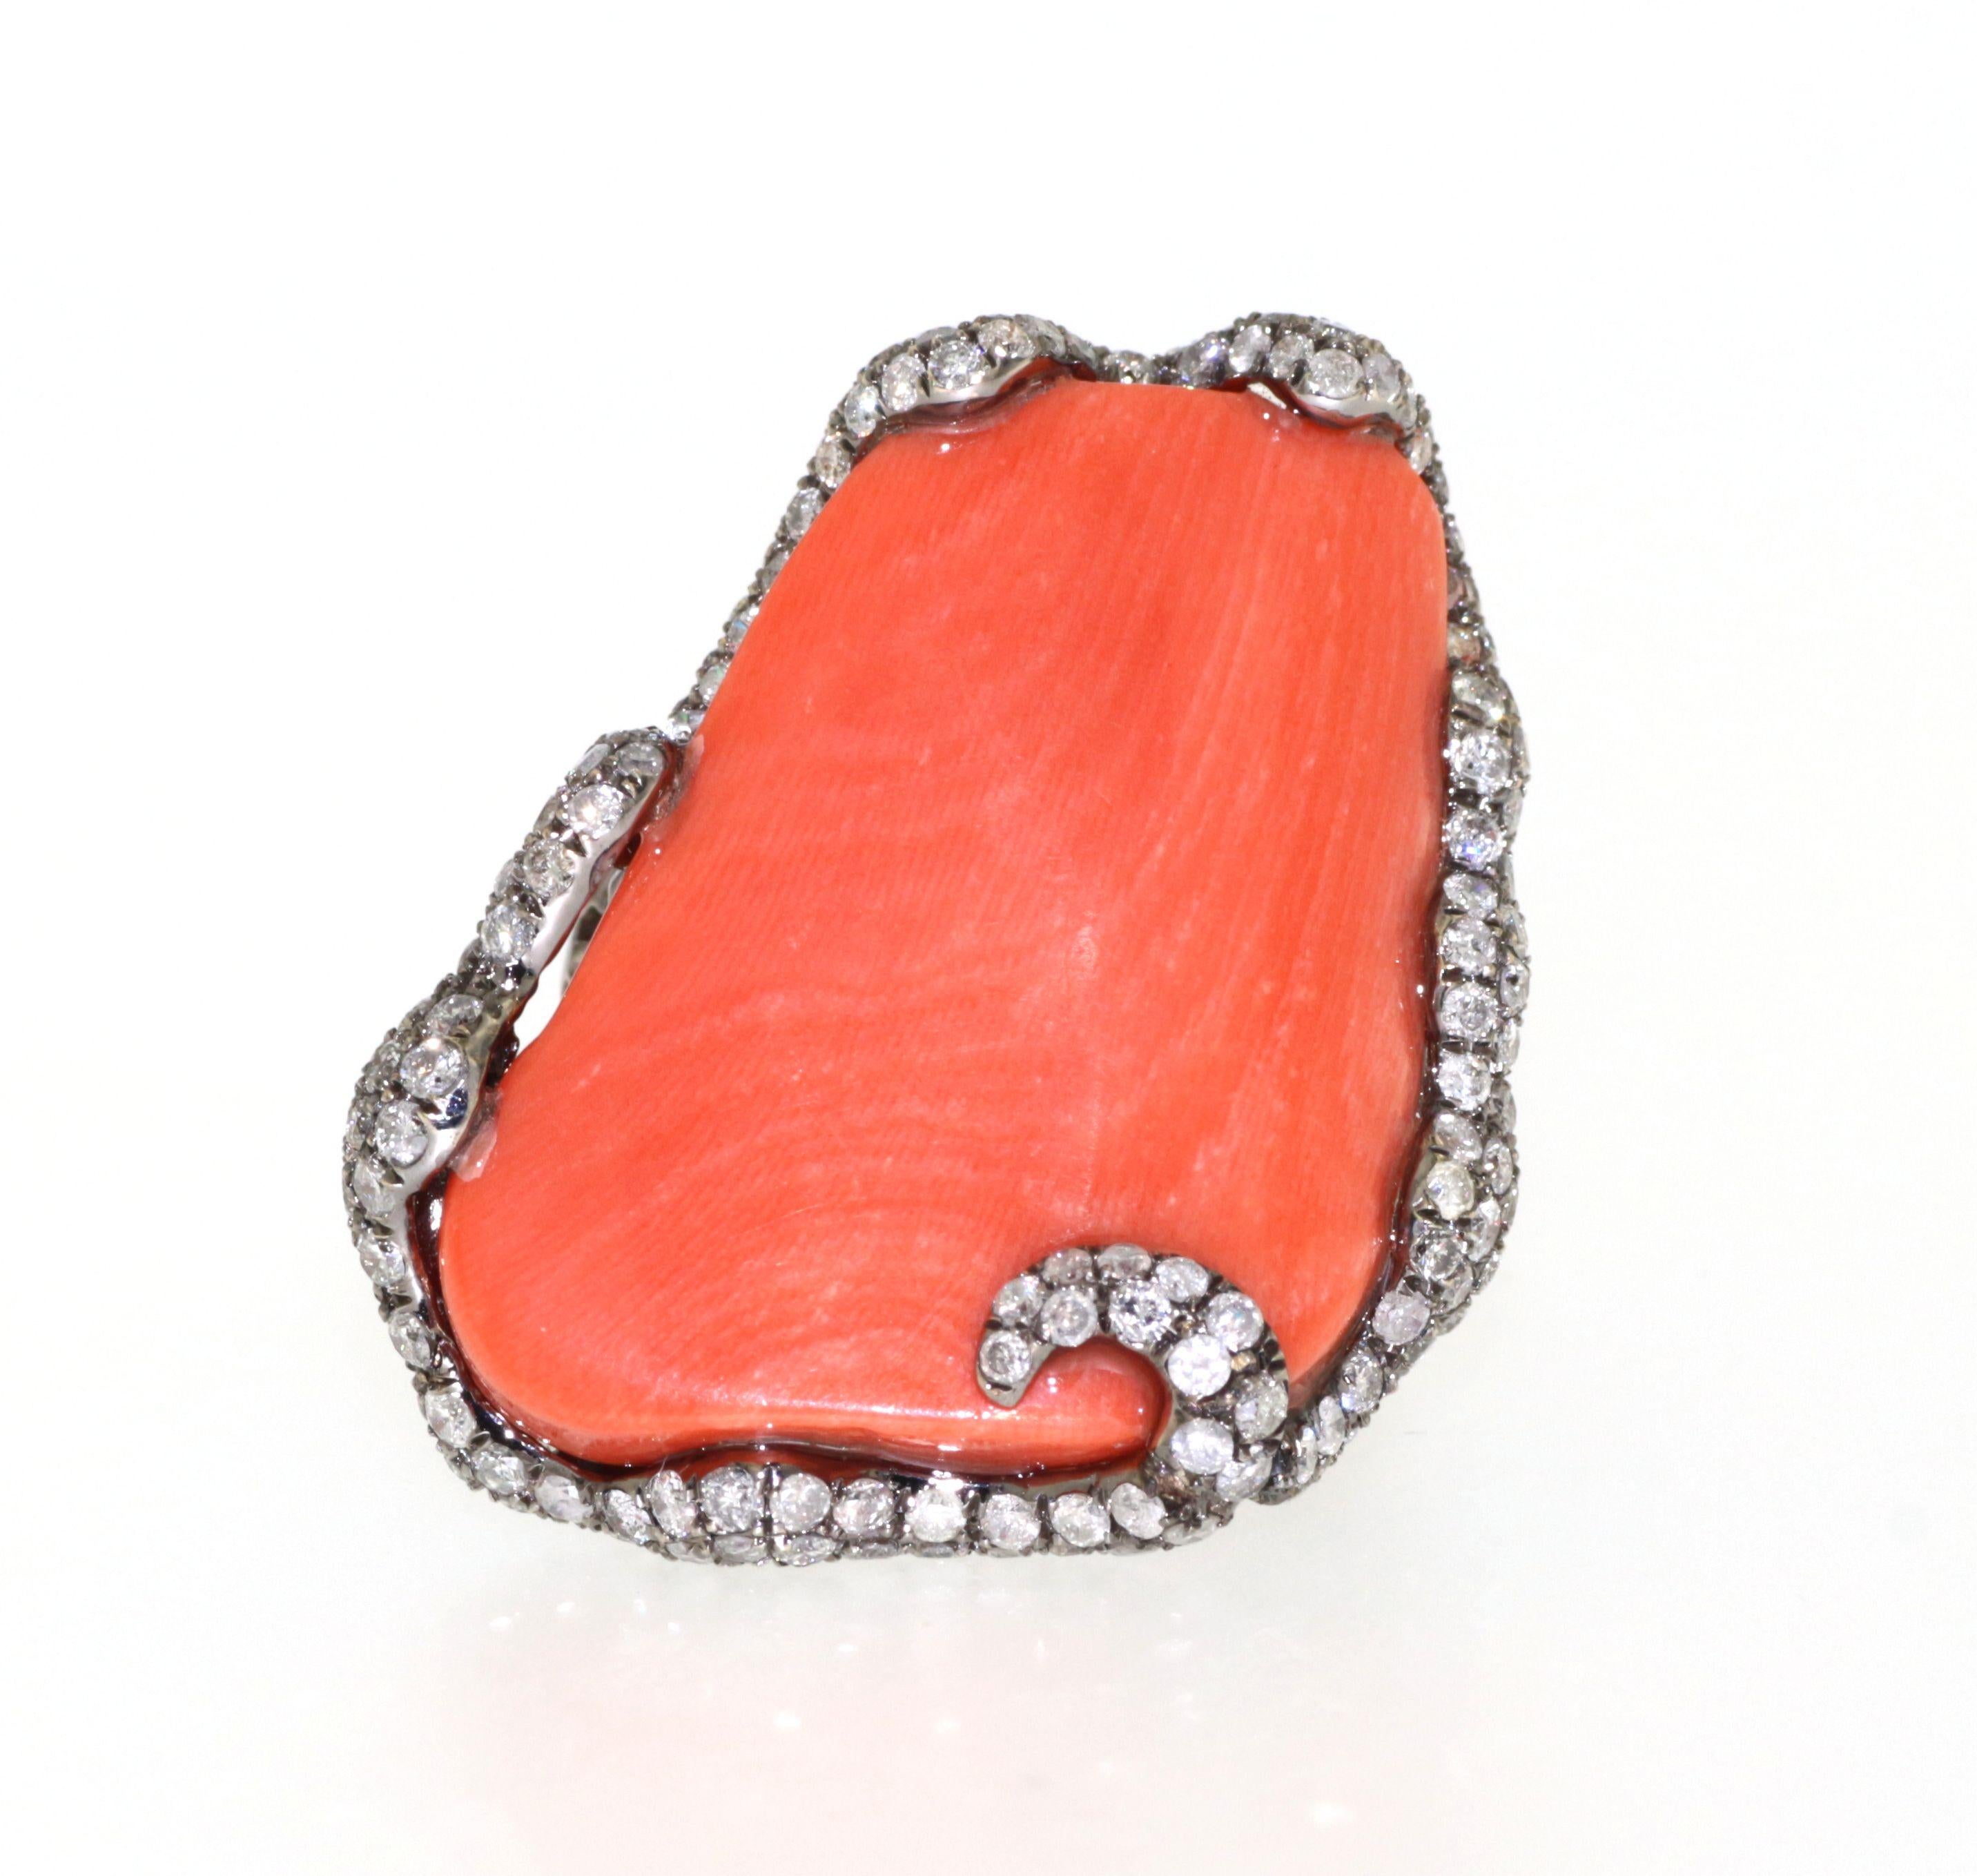 This magnificent ring features a large, smooth coral centerpiece weighing 6.98 grams, enveloped in a luxurious embrace of sparkling white diamonds totaling 0.85 carats and natts diamonds of 1.72 carats. The coral's warm, rich hue is beautifully